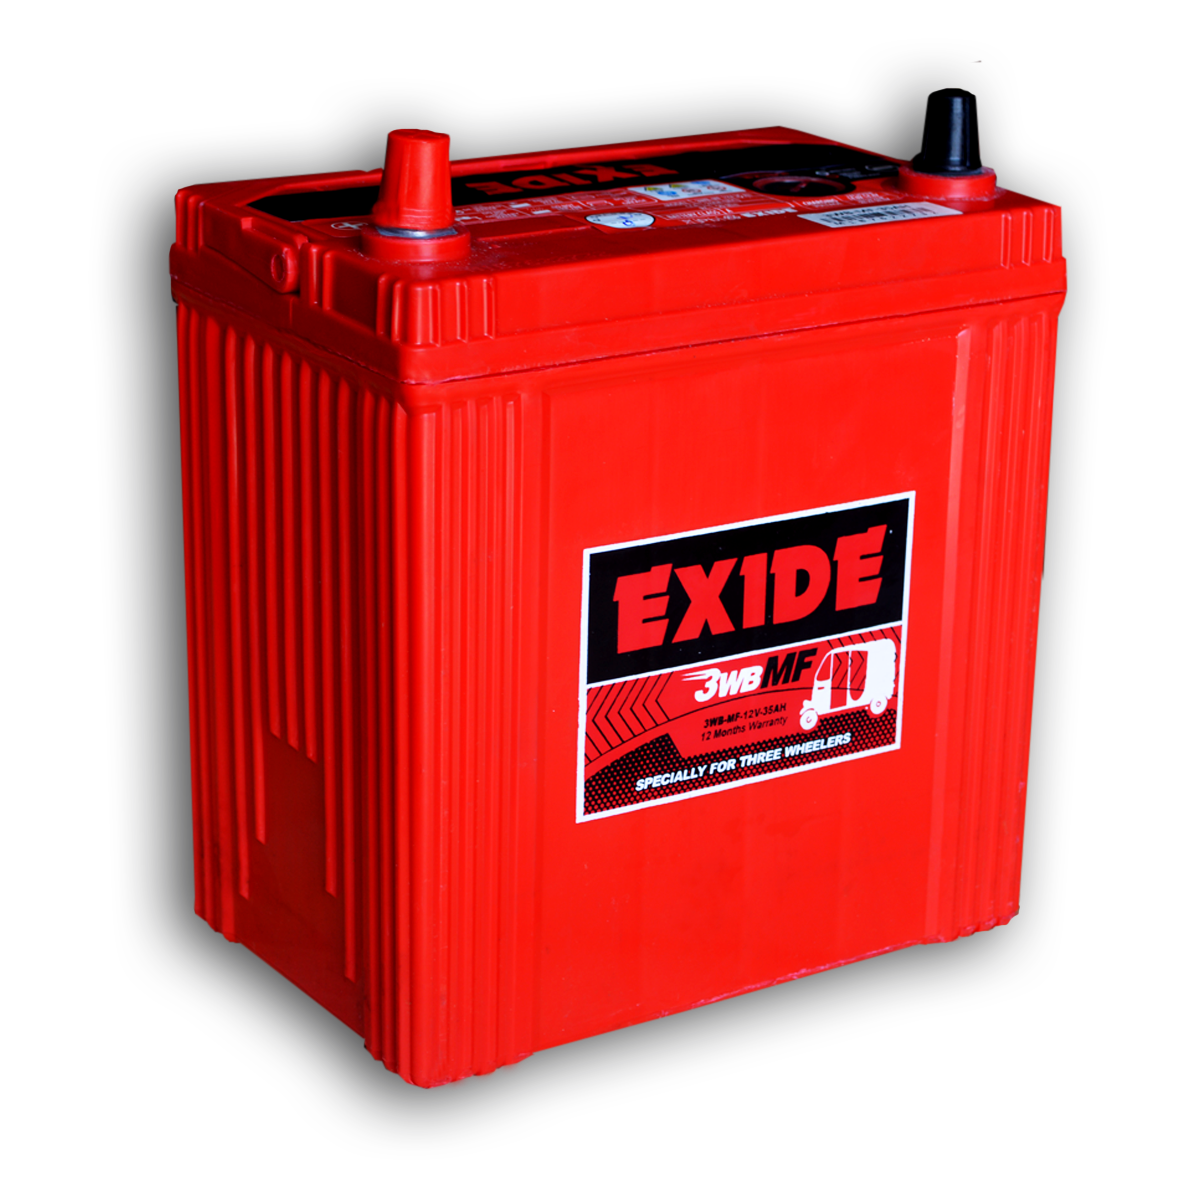 How To Check Exide Battery Manufacturing Date - How To Read Exide